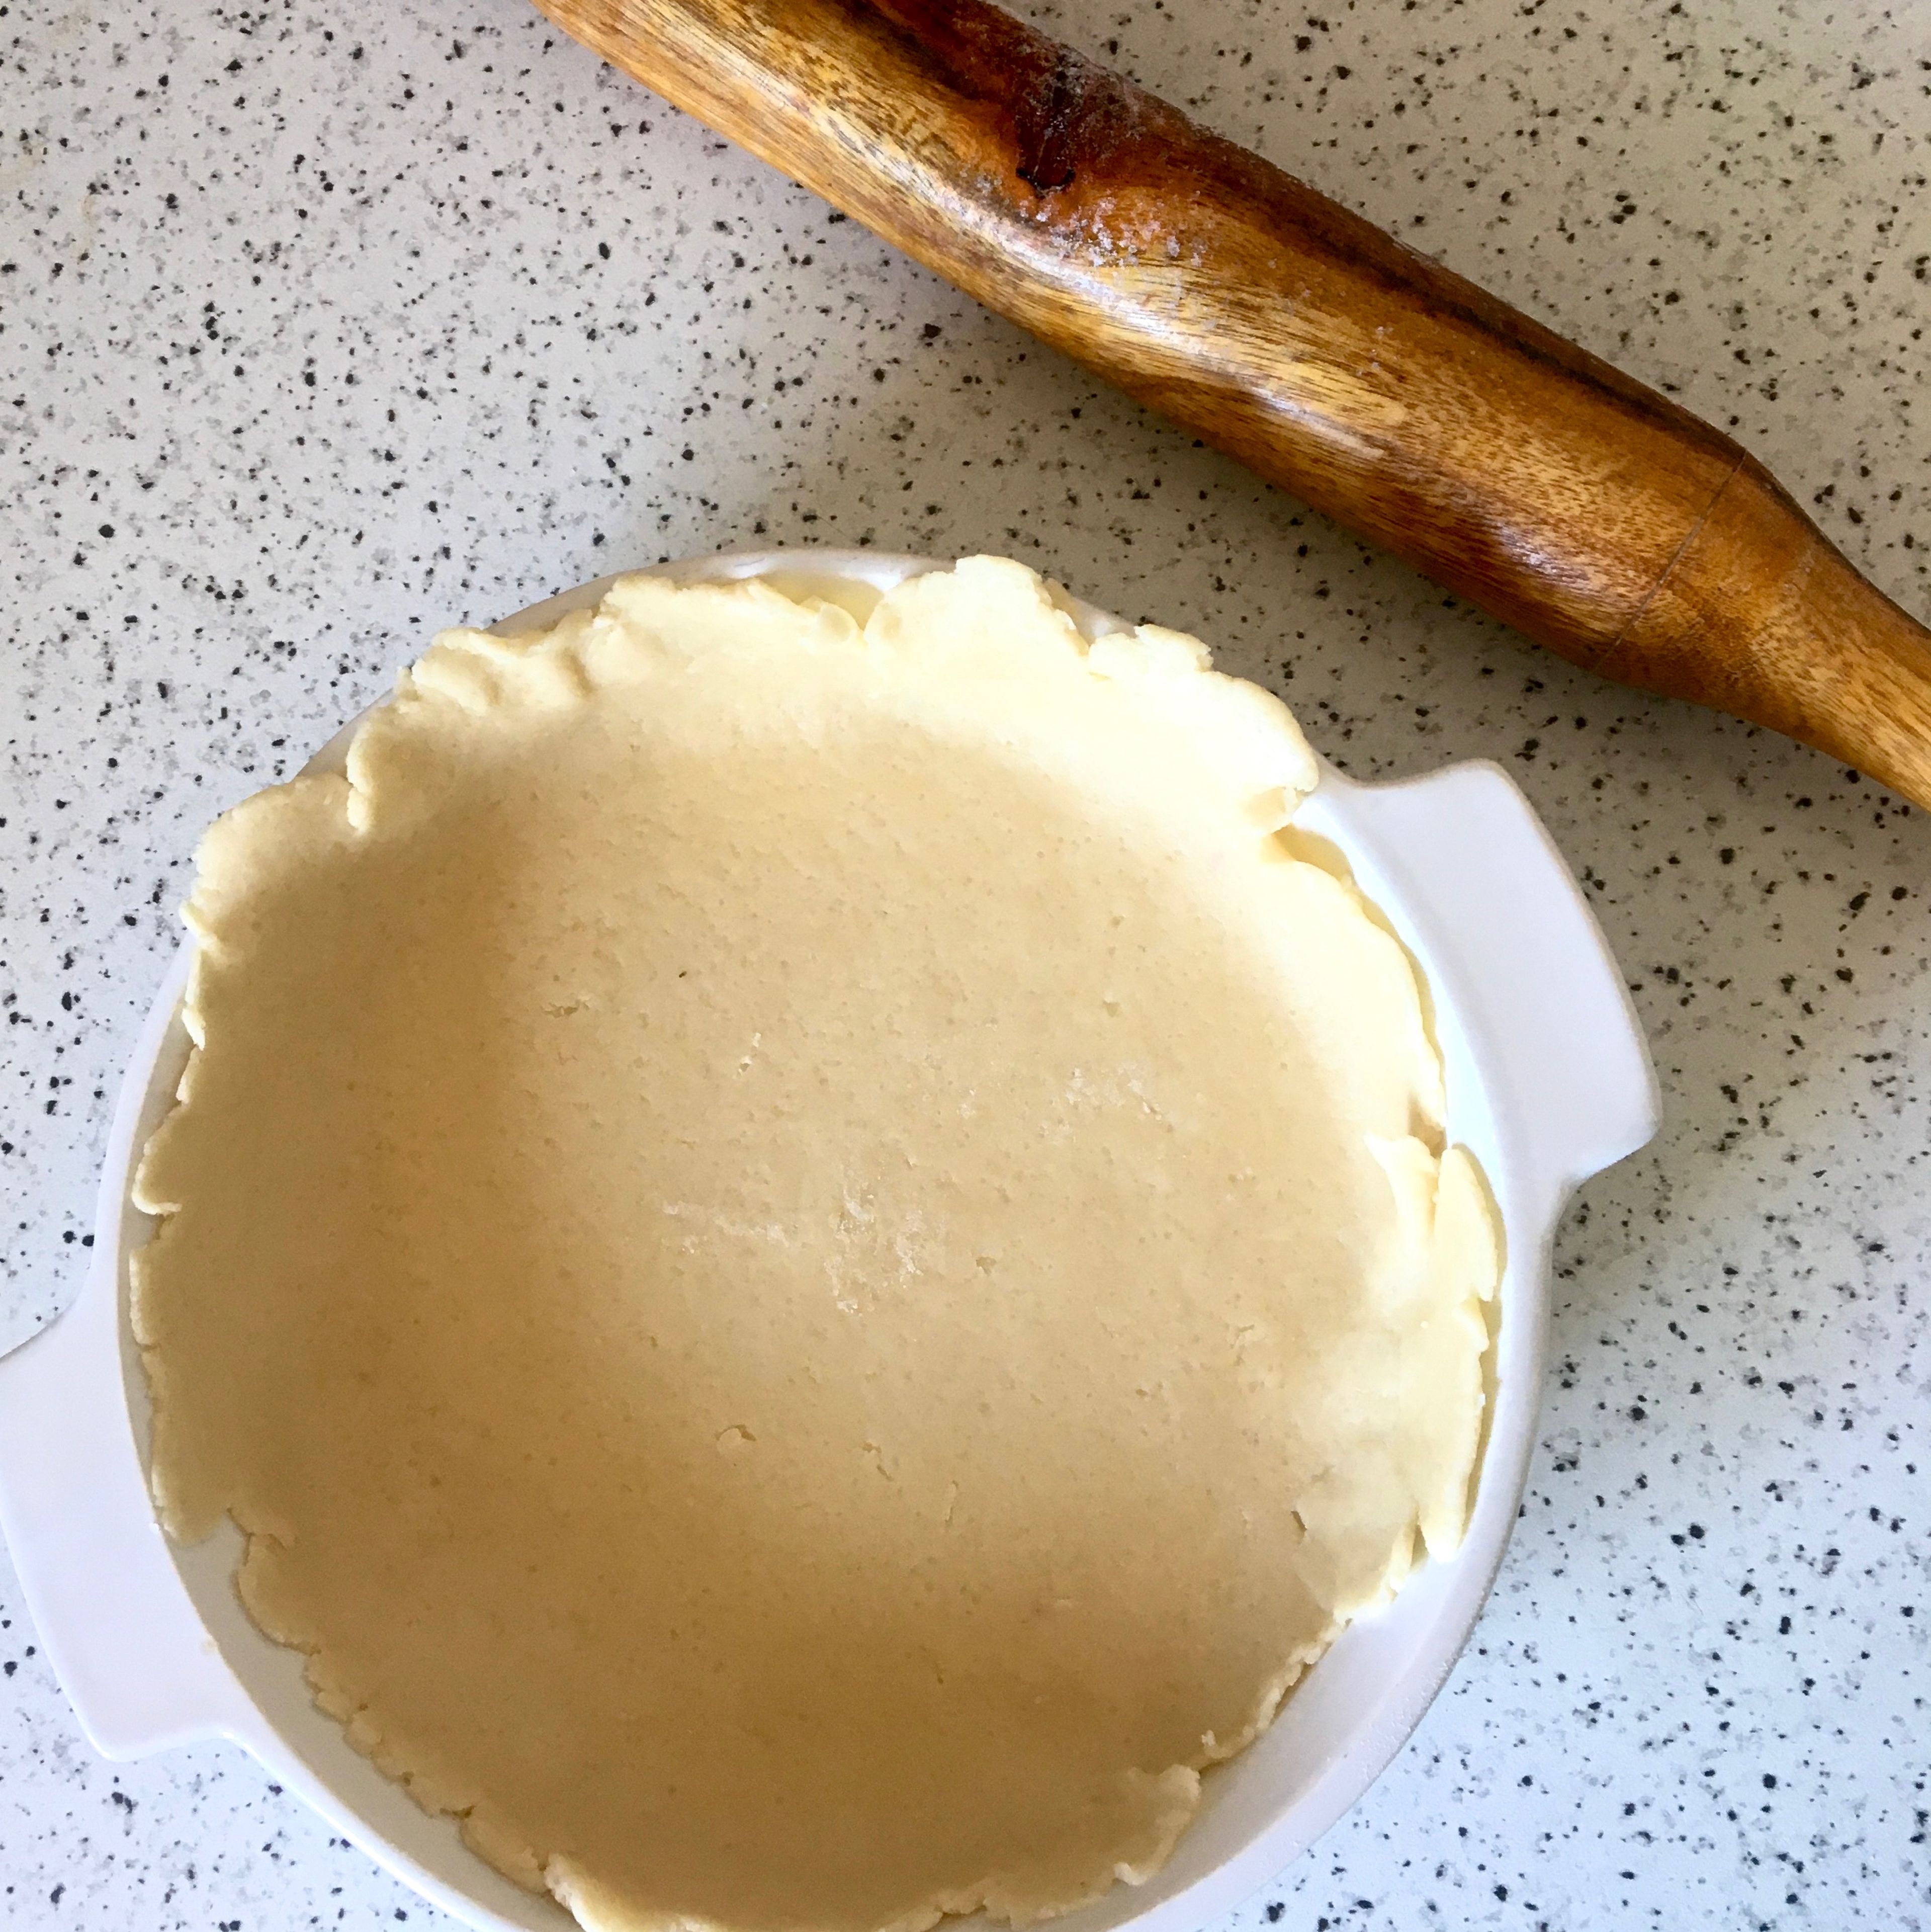 Divide the dough in two unequal pieces, around 40%-60% is a good division. Flour a rolling pin and work surface. Roll out the bigger piece of dough into a disc, slightly larger than your pie dish. Transfer it to the dish, covering the bottom and sides. Sprinkle the cinnamon over the base.